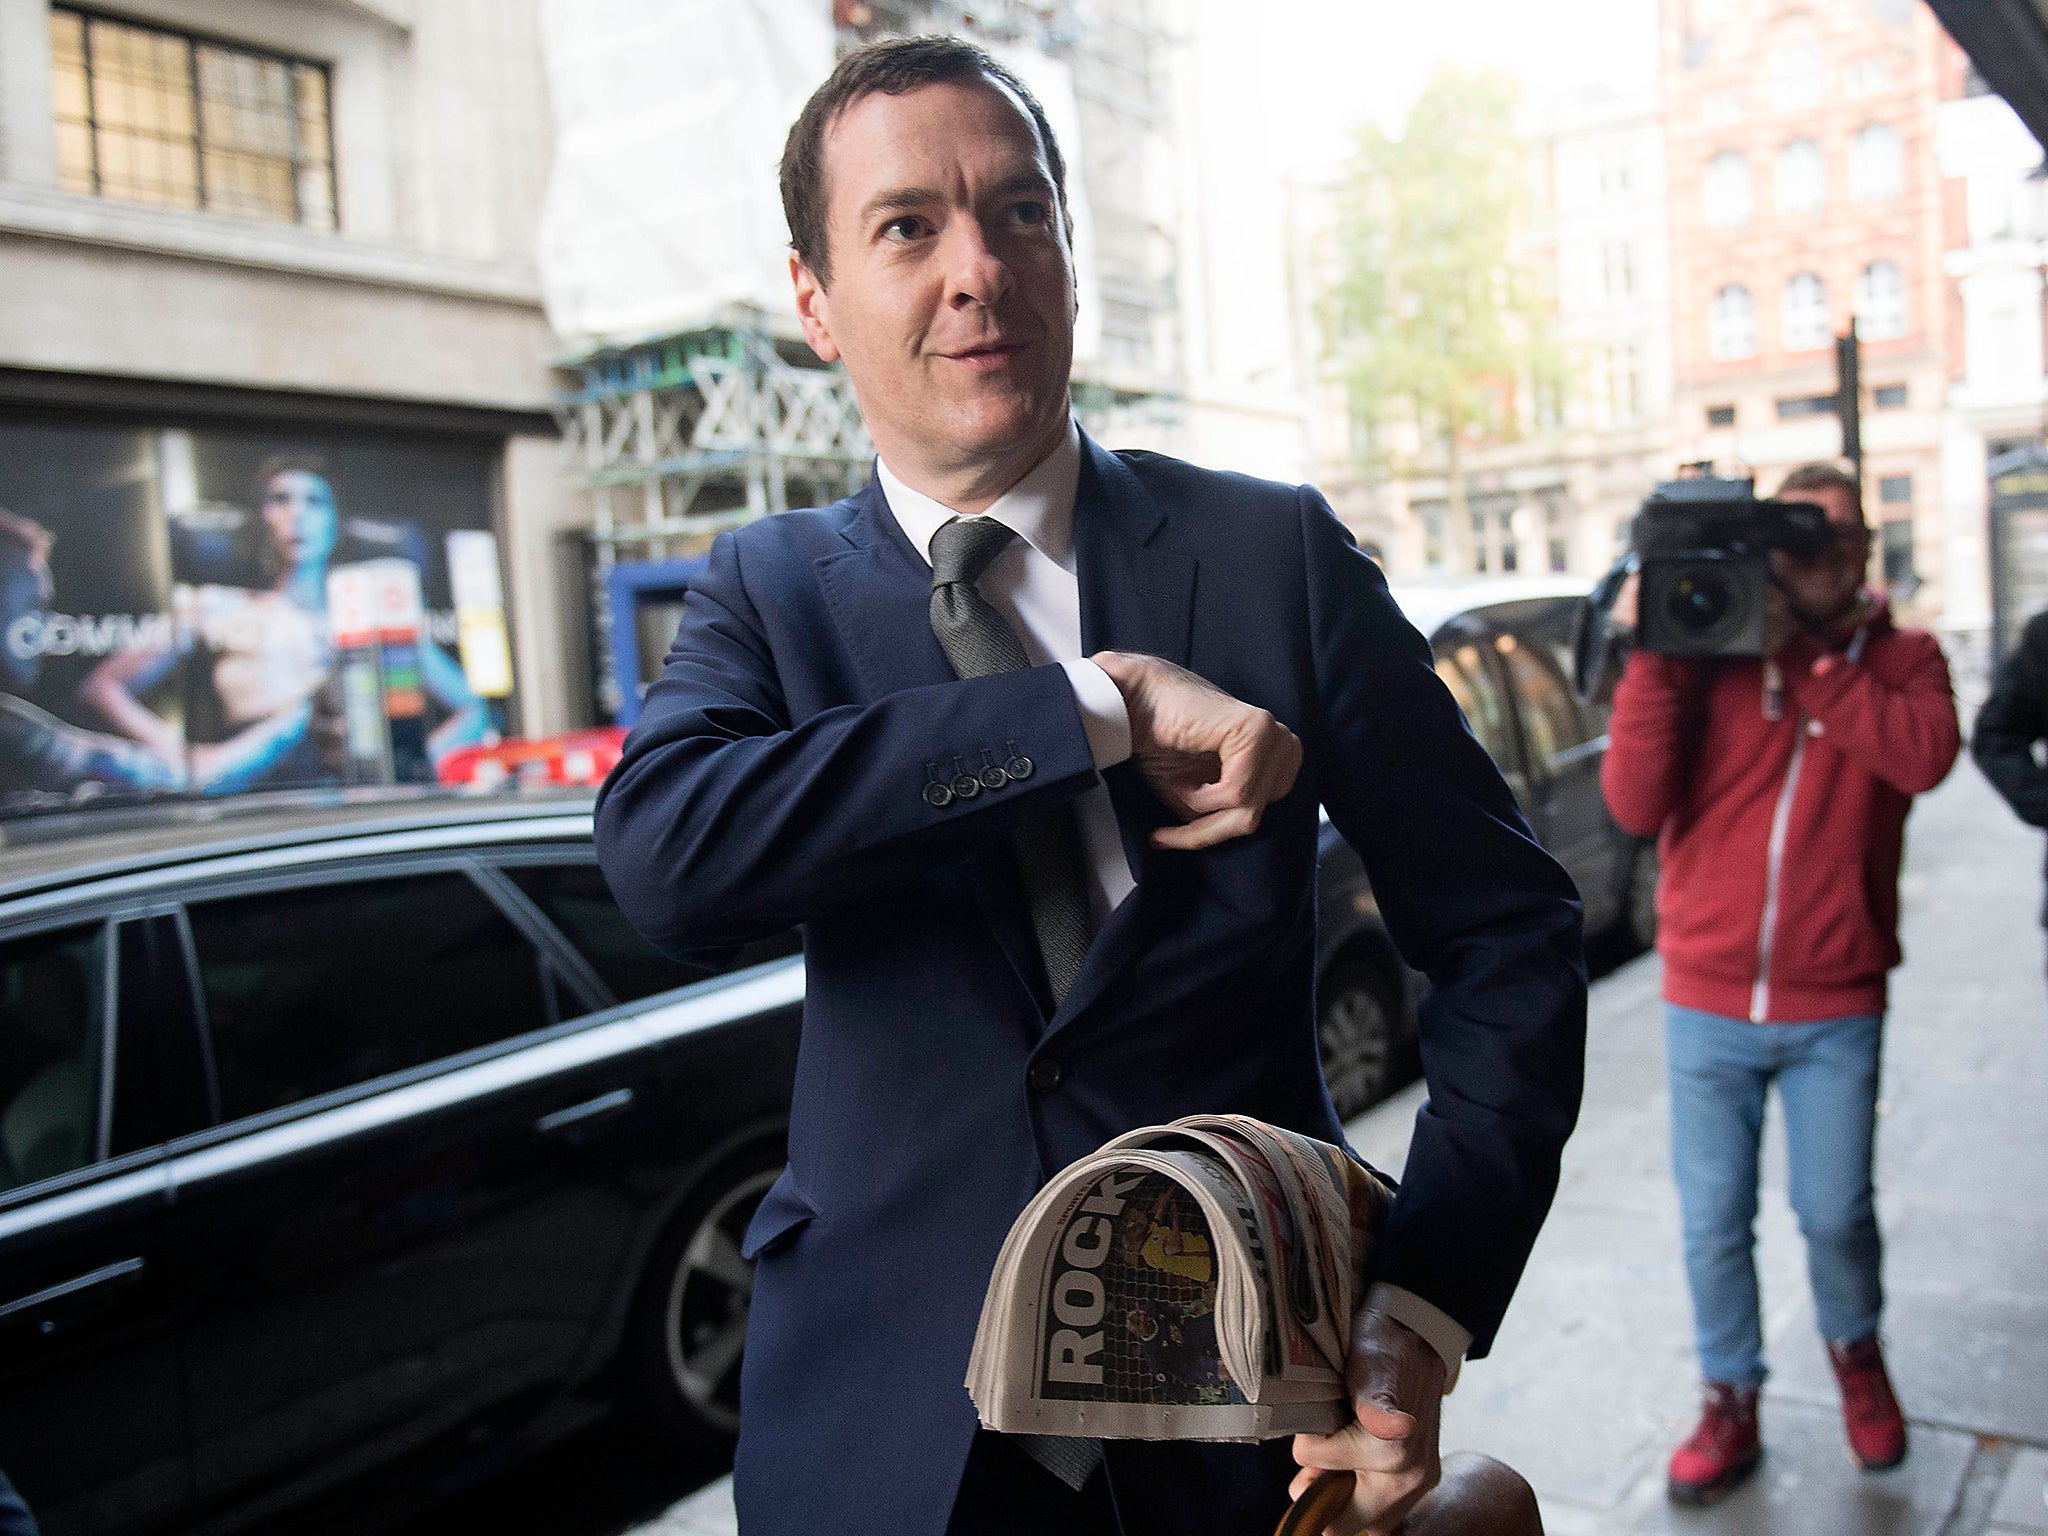 Former Chancellor George Osborne arrives at the ‘London Evening Standard’ offices at Northcliffe House in Kensington, west London, to begin his new role as editor of the newspaper